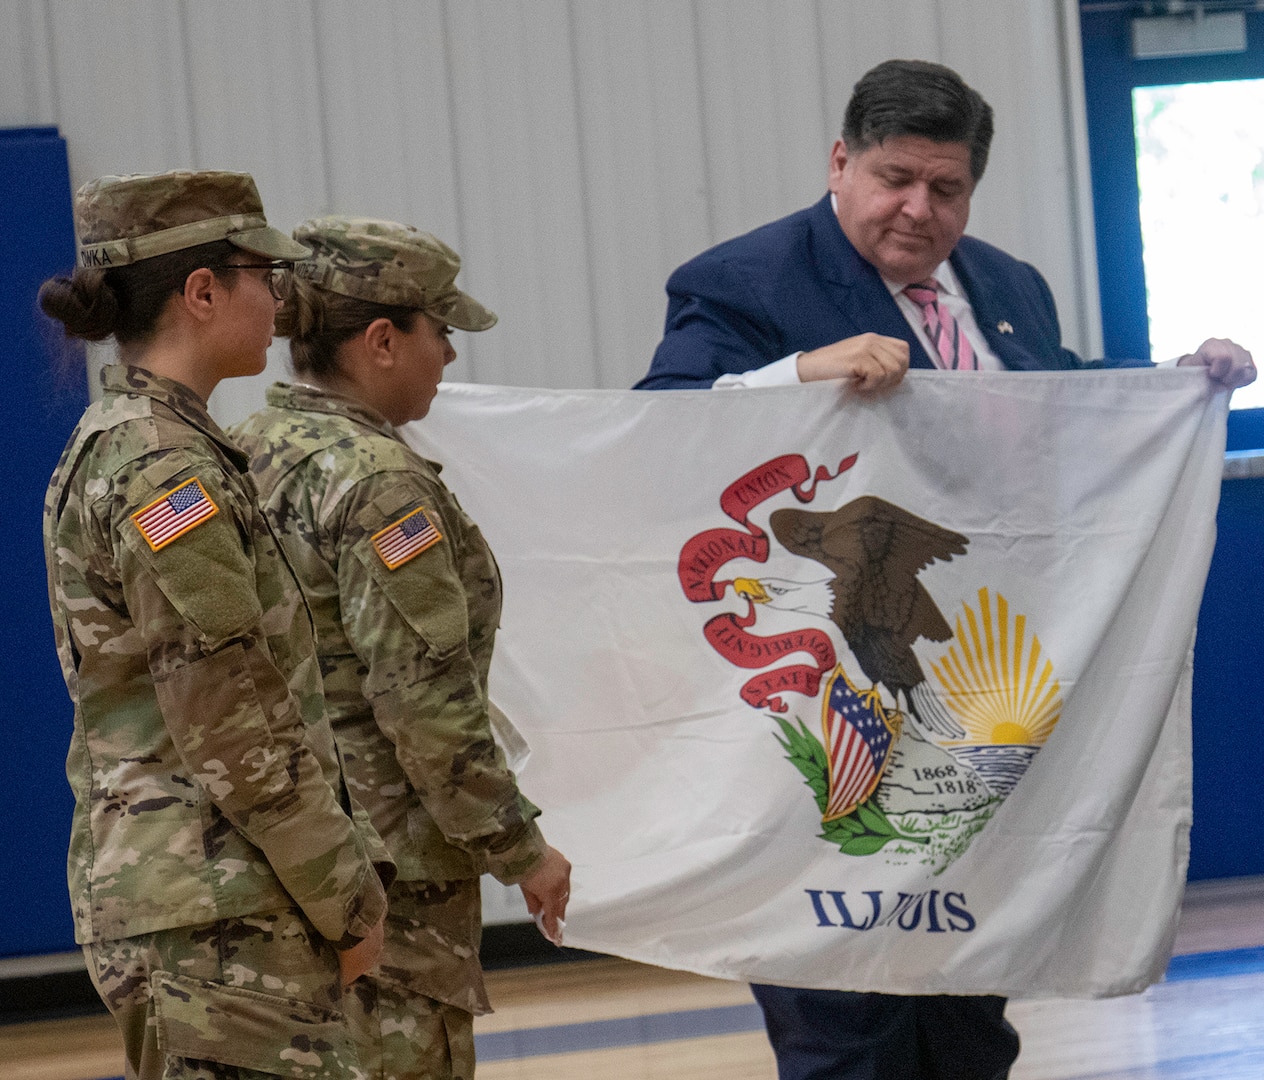 Illinois Governor JB Pritzker presents a state of Illinois flag to Maj. Karen Hernandez, of Bensenville, Commander of the 709th Medical Company Area Support, based in Bartonville, during the deployment ceremony Aug. 6 at Monroe Elementary School in Peoria.